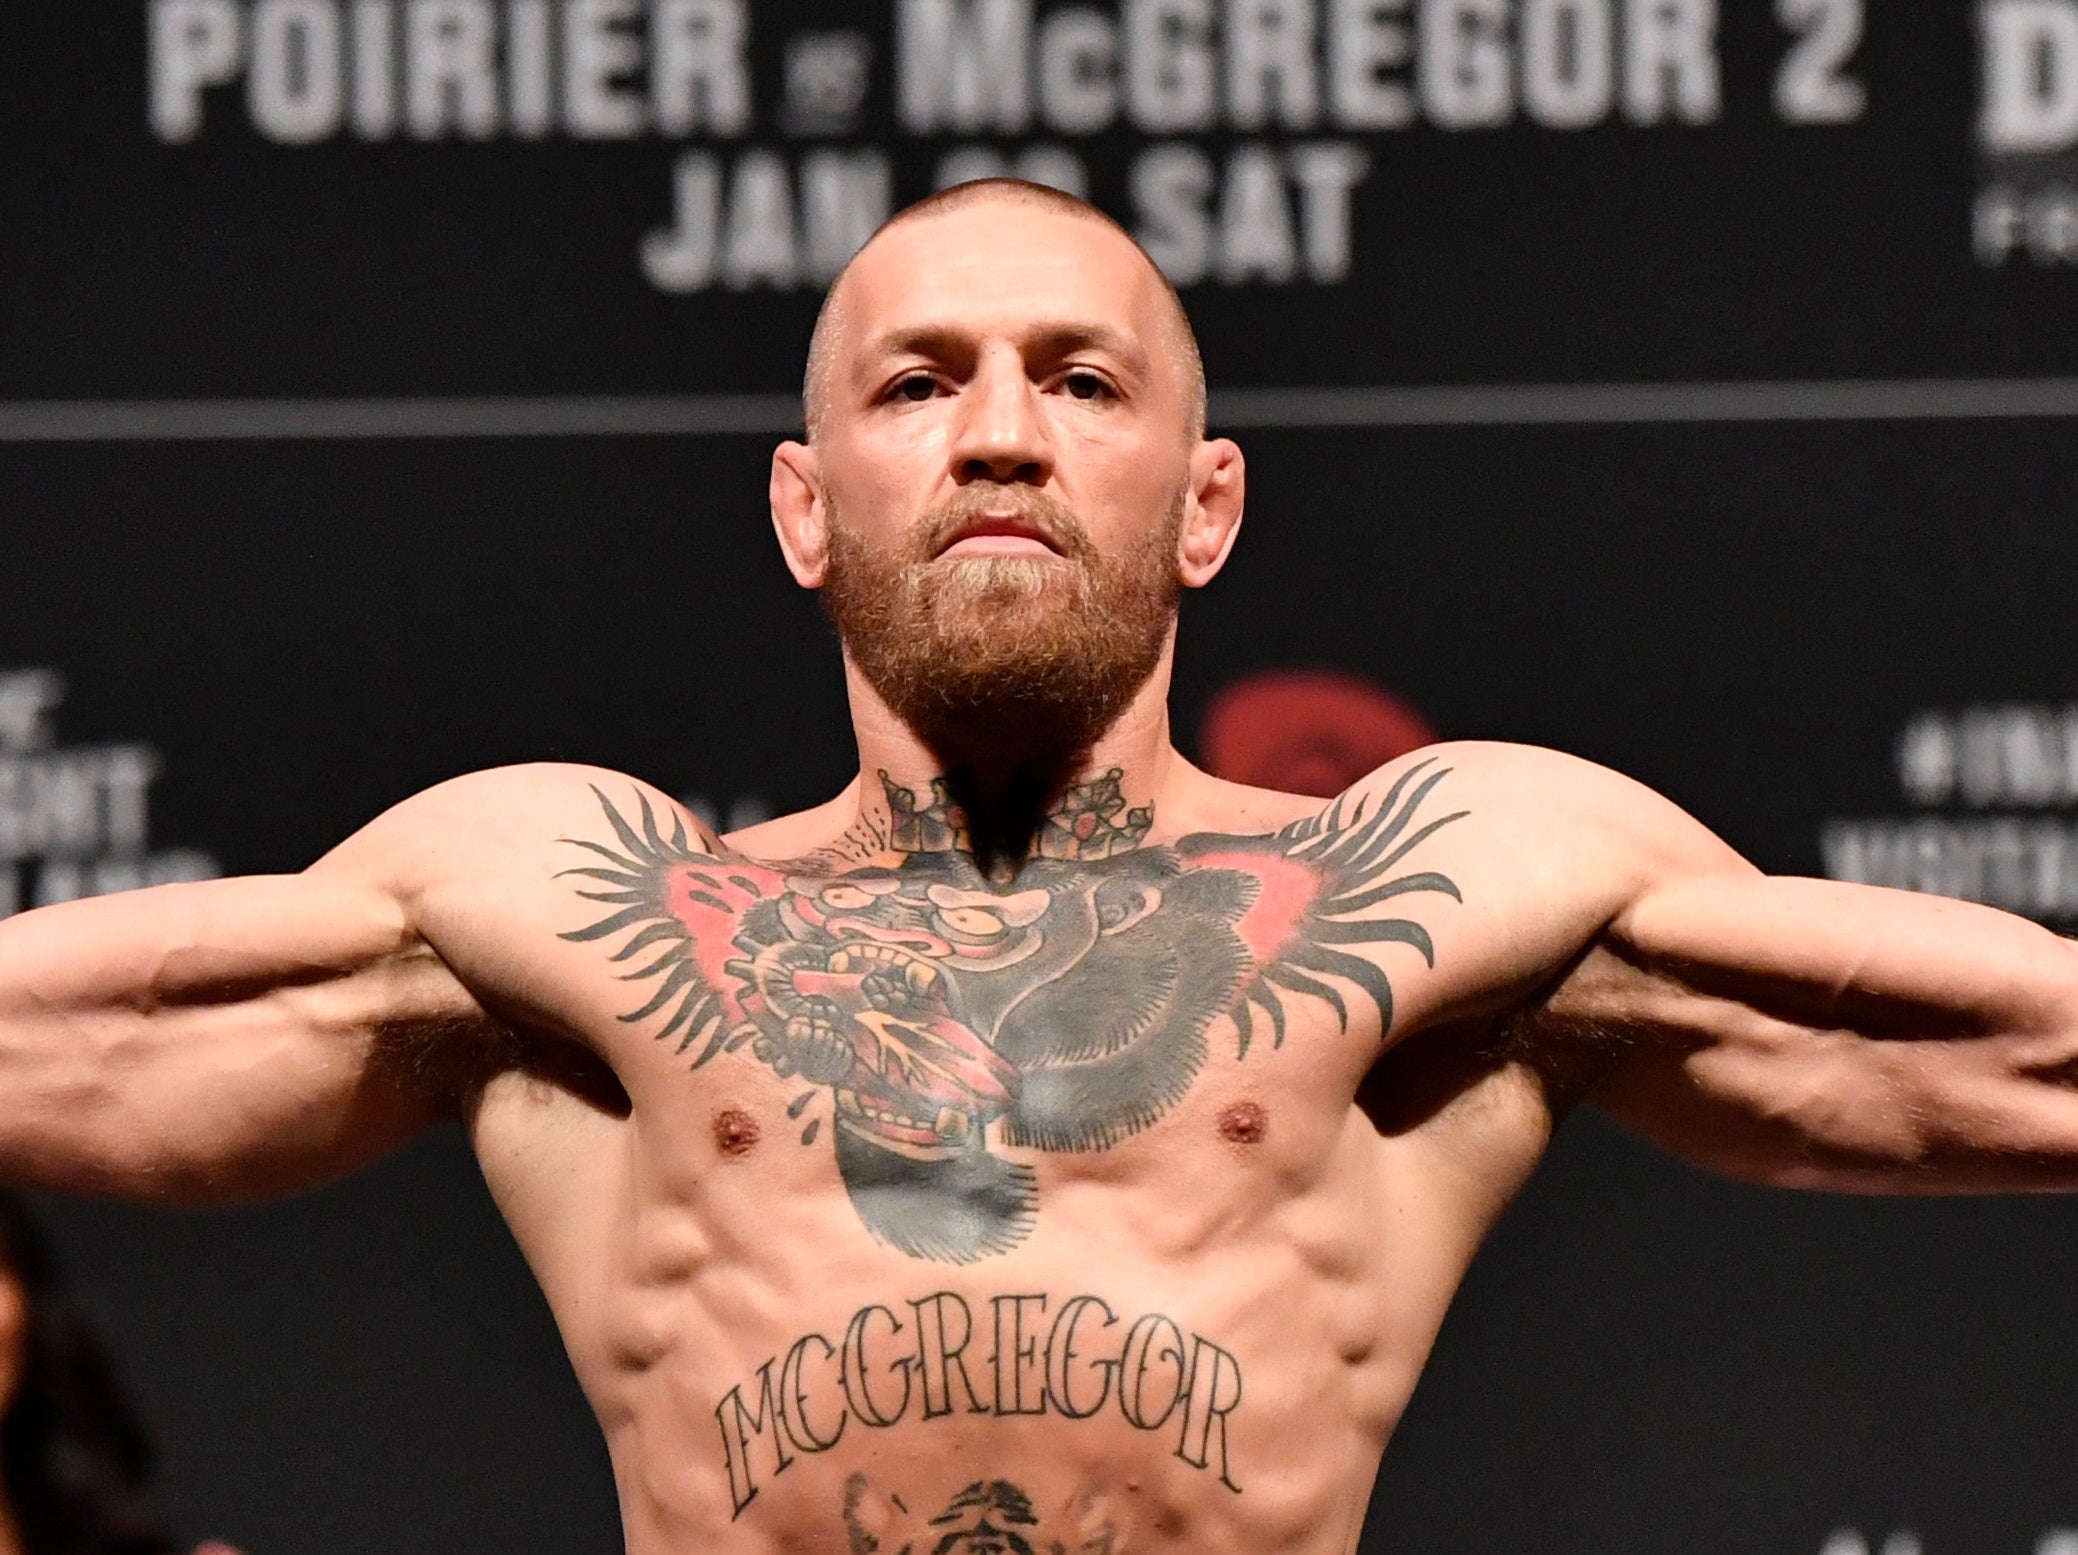 Former UFC champion Conor McGregor on the scales